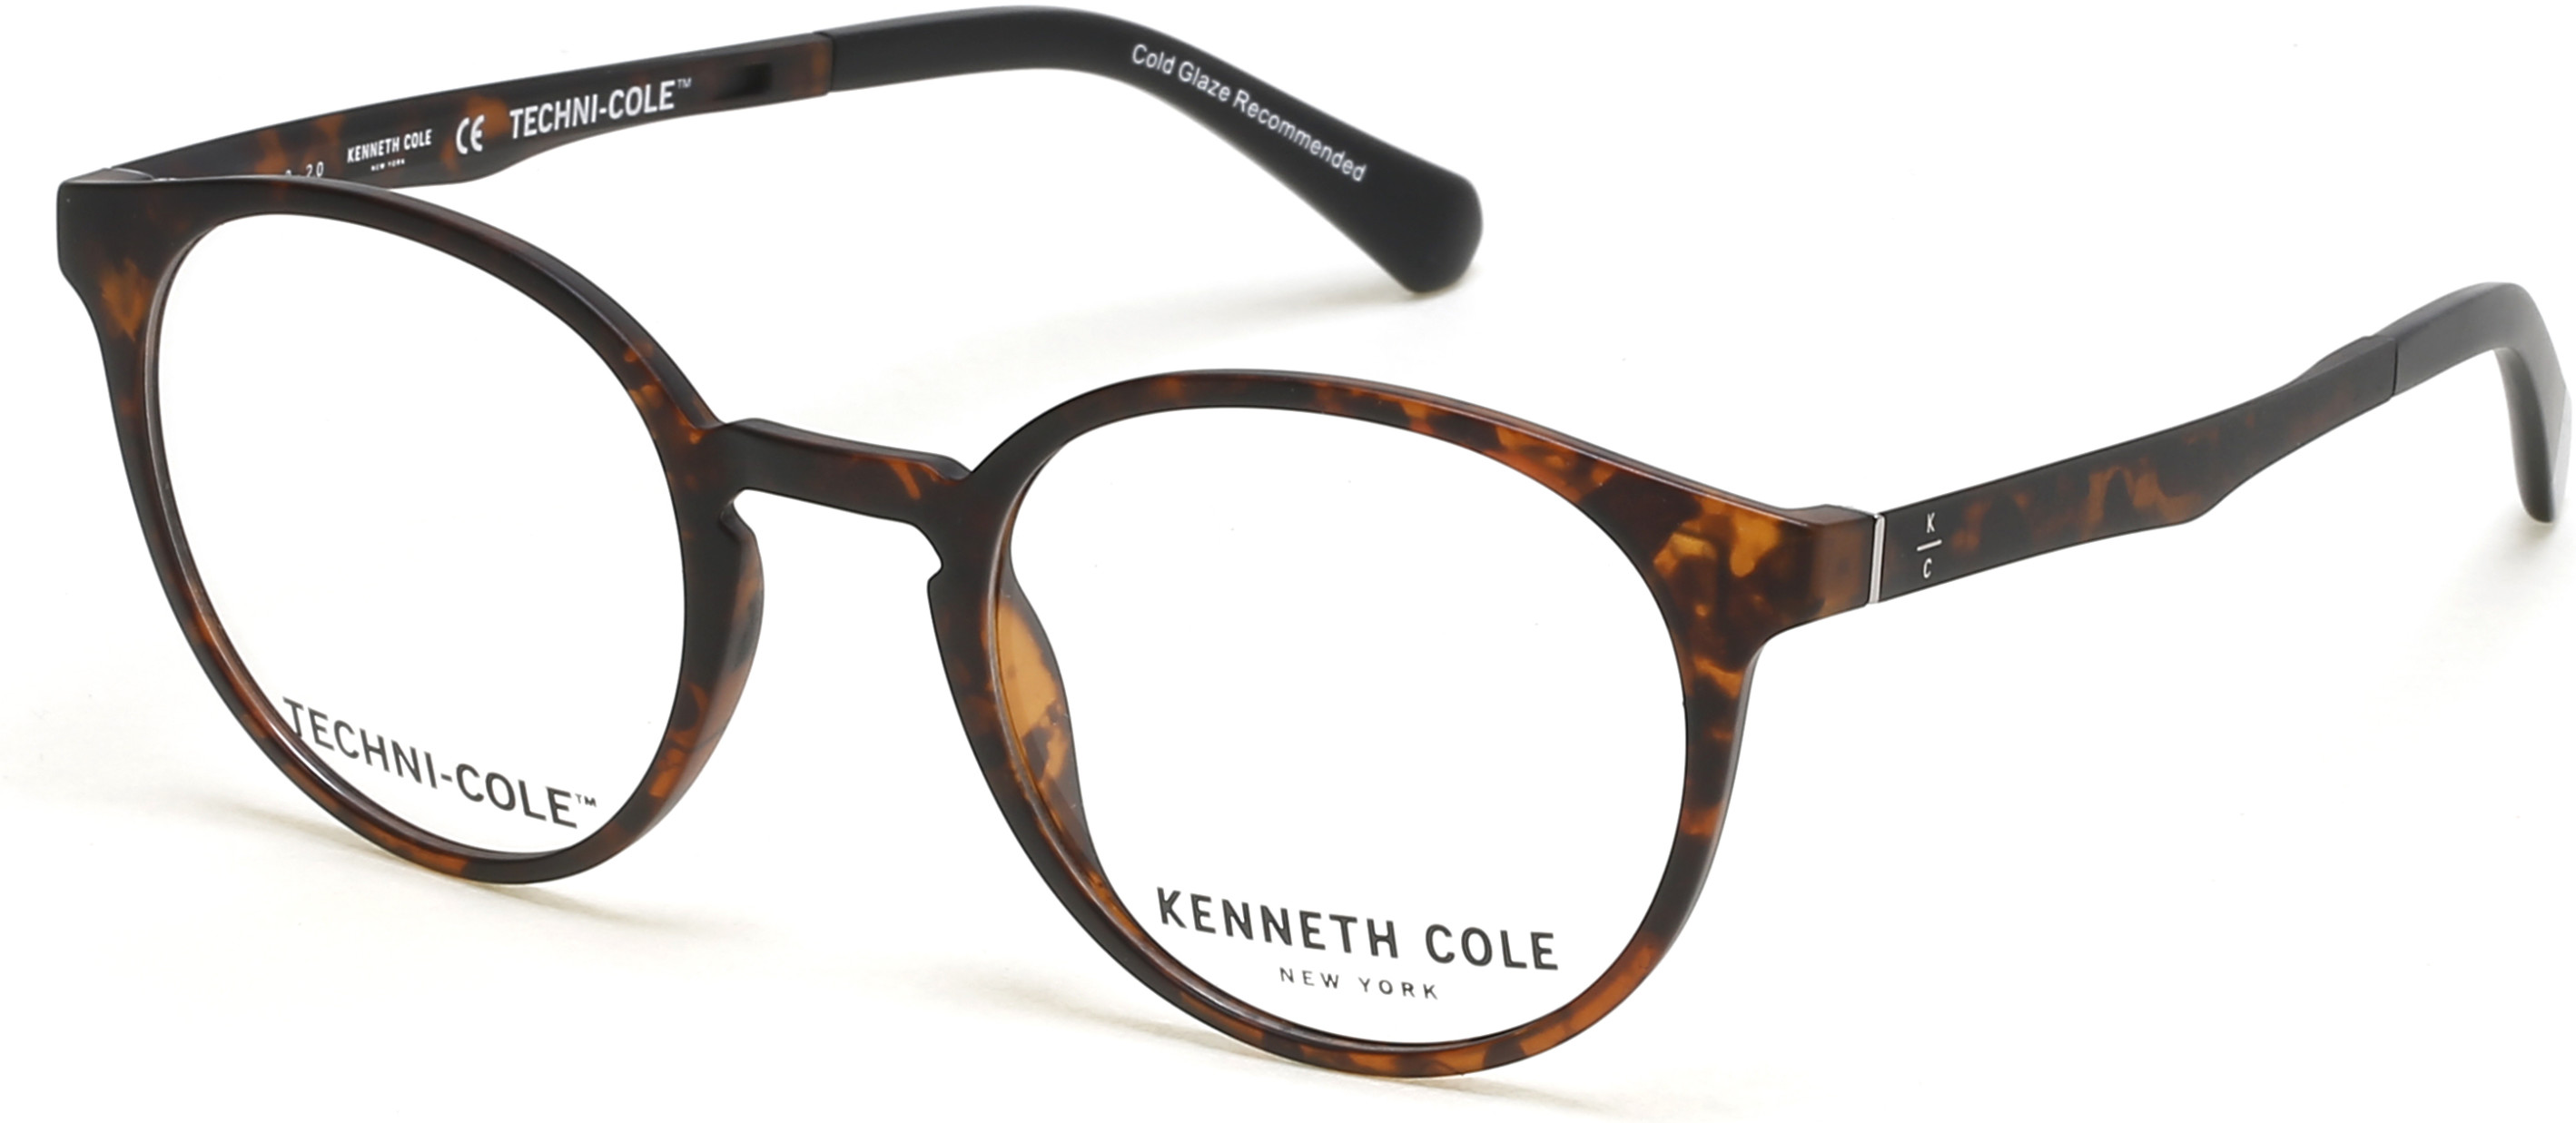 KENNETH COLE NY 0319 052